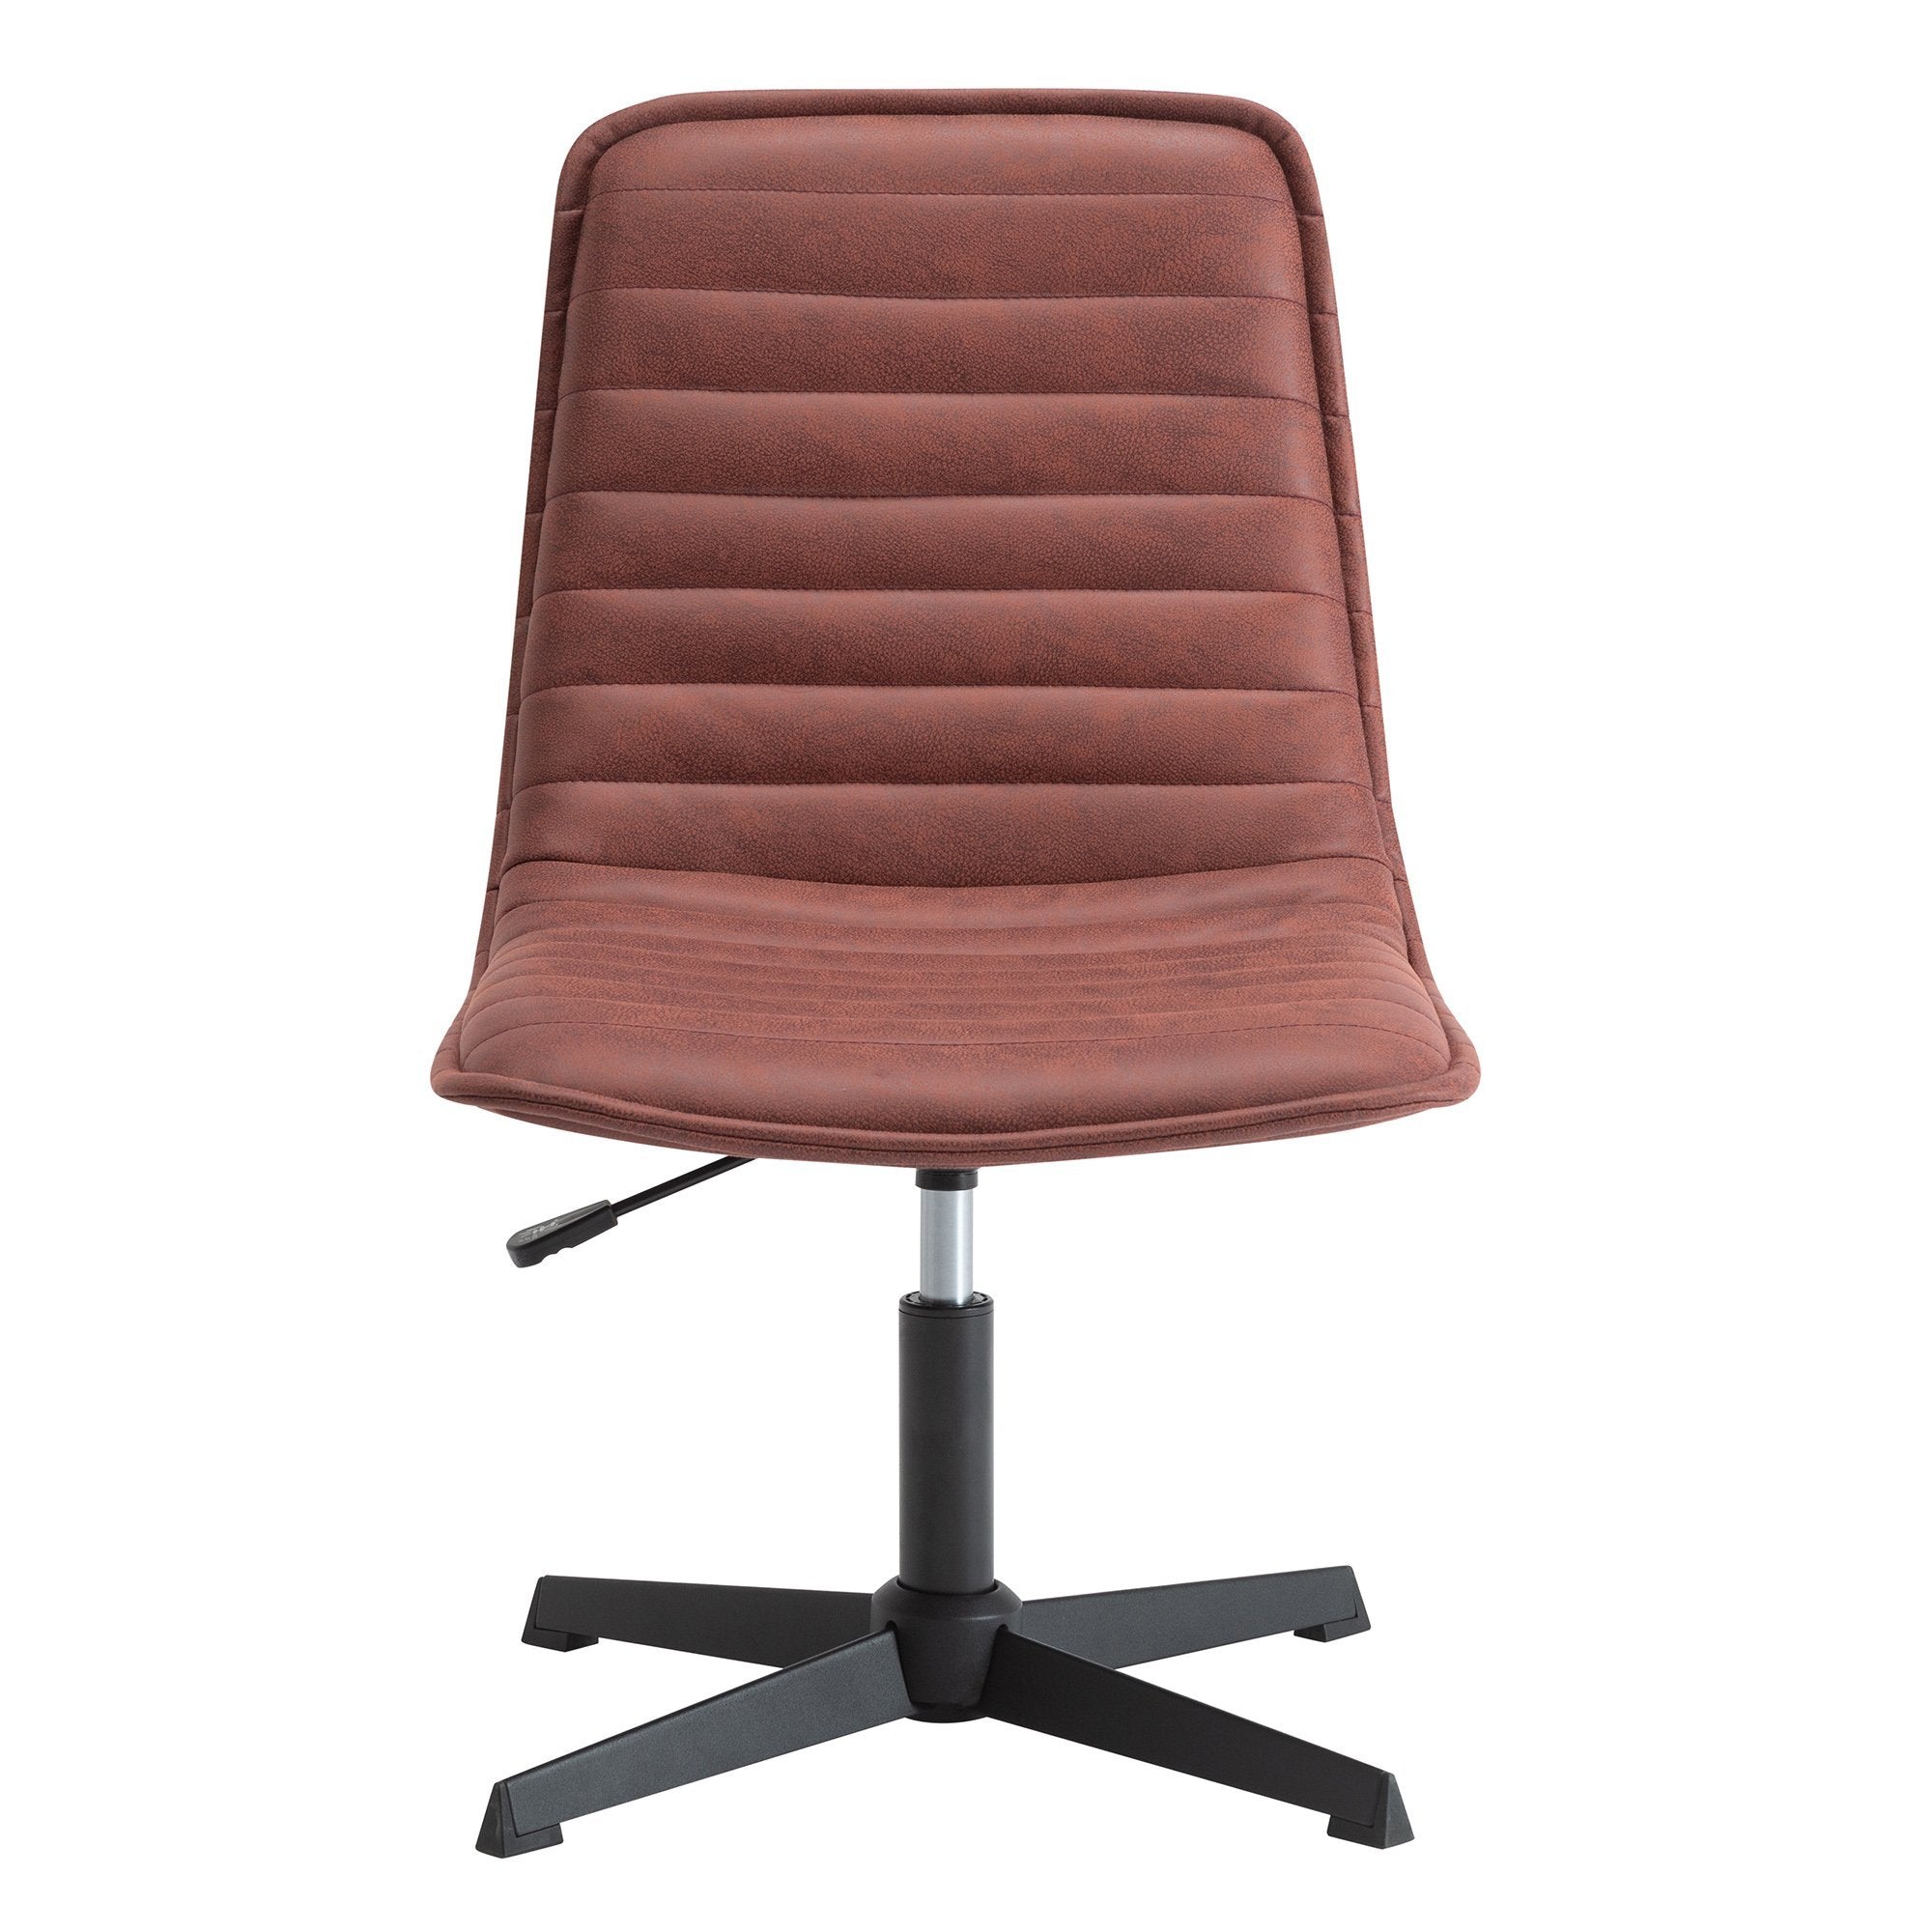 Avery Office Chair - Archiology